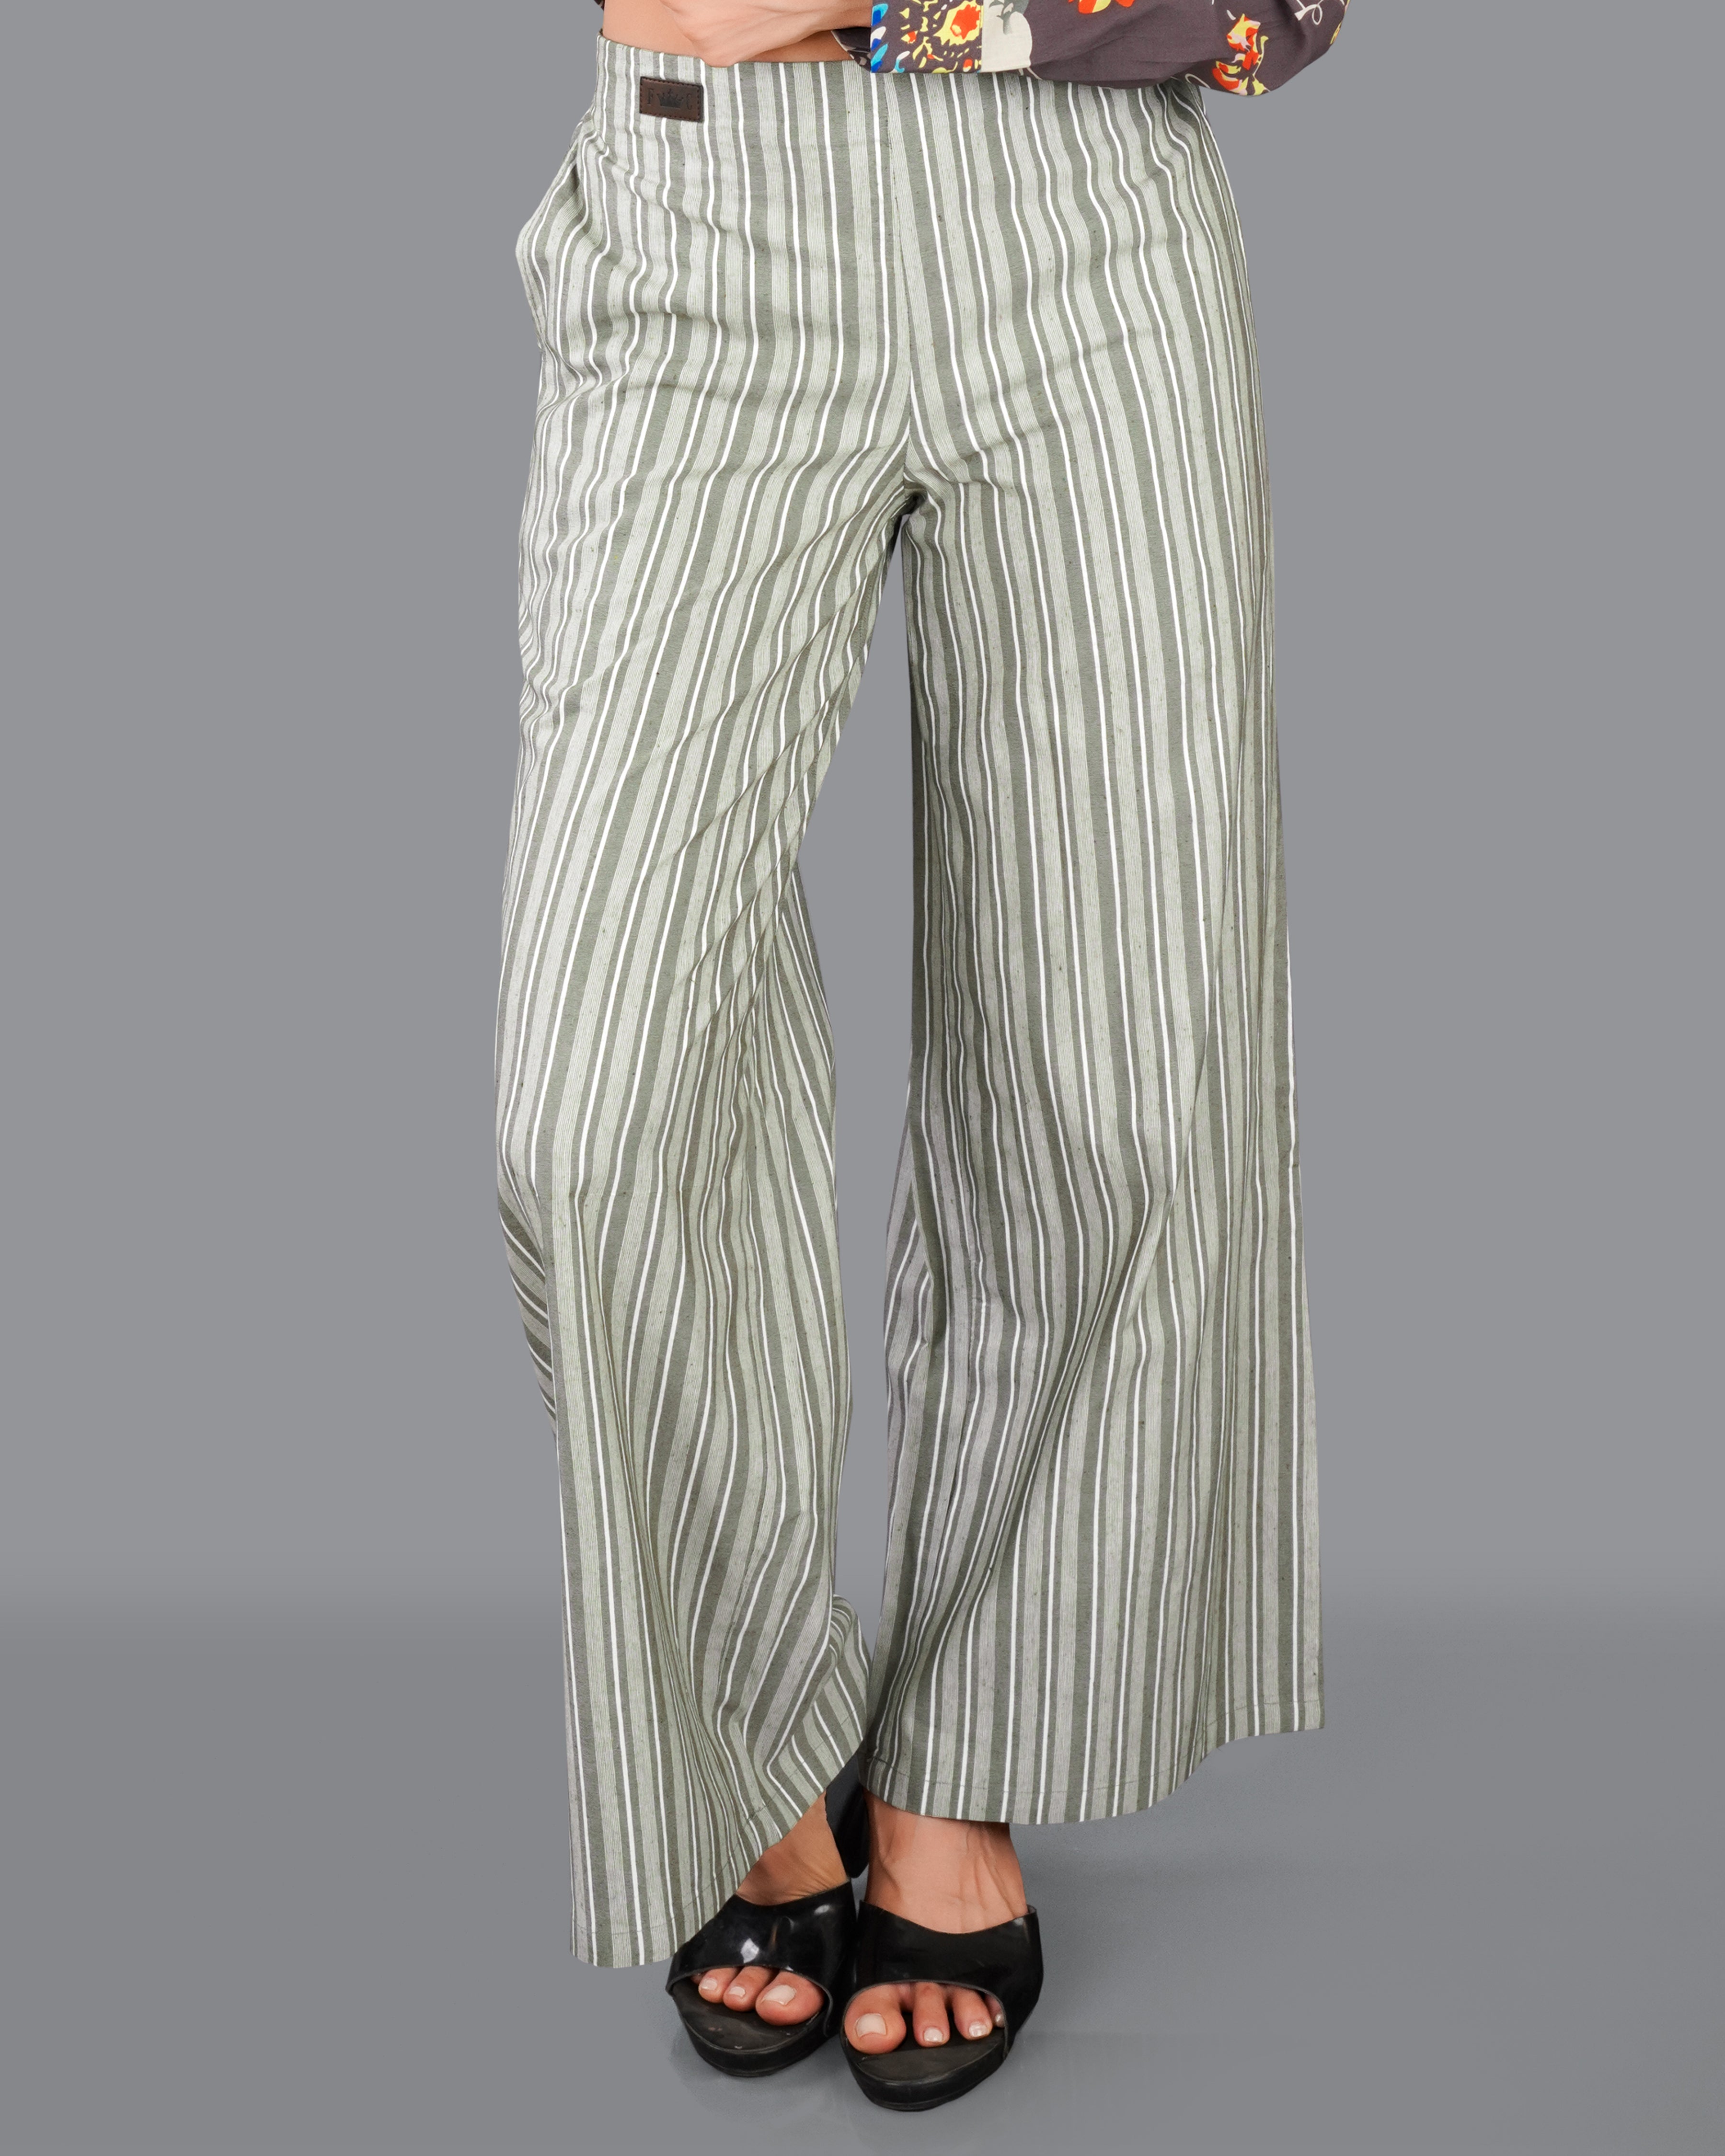 Gainsboro and Pale Oyster Gray Striped Premium Cotton Pants